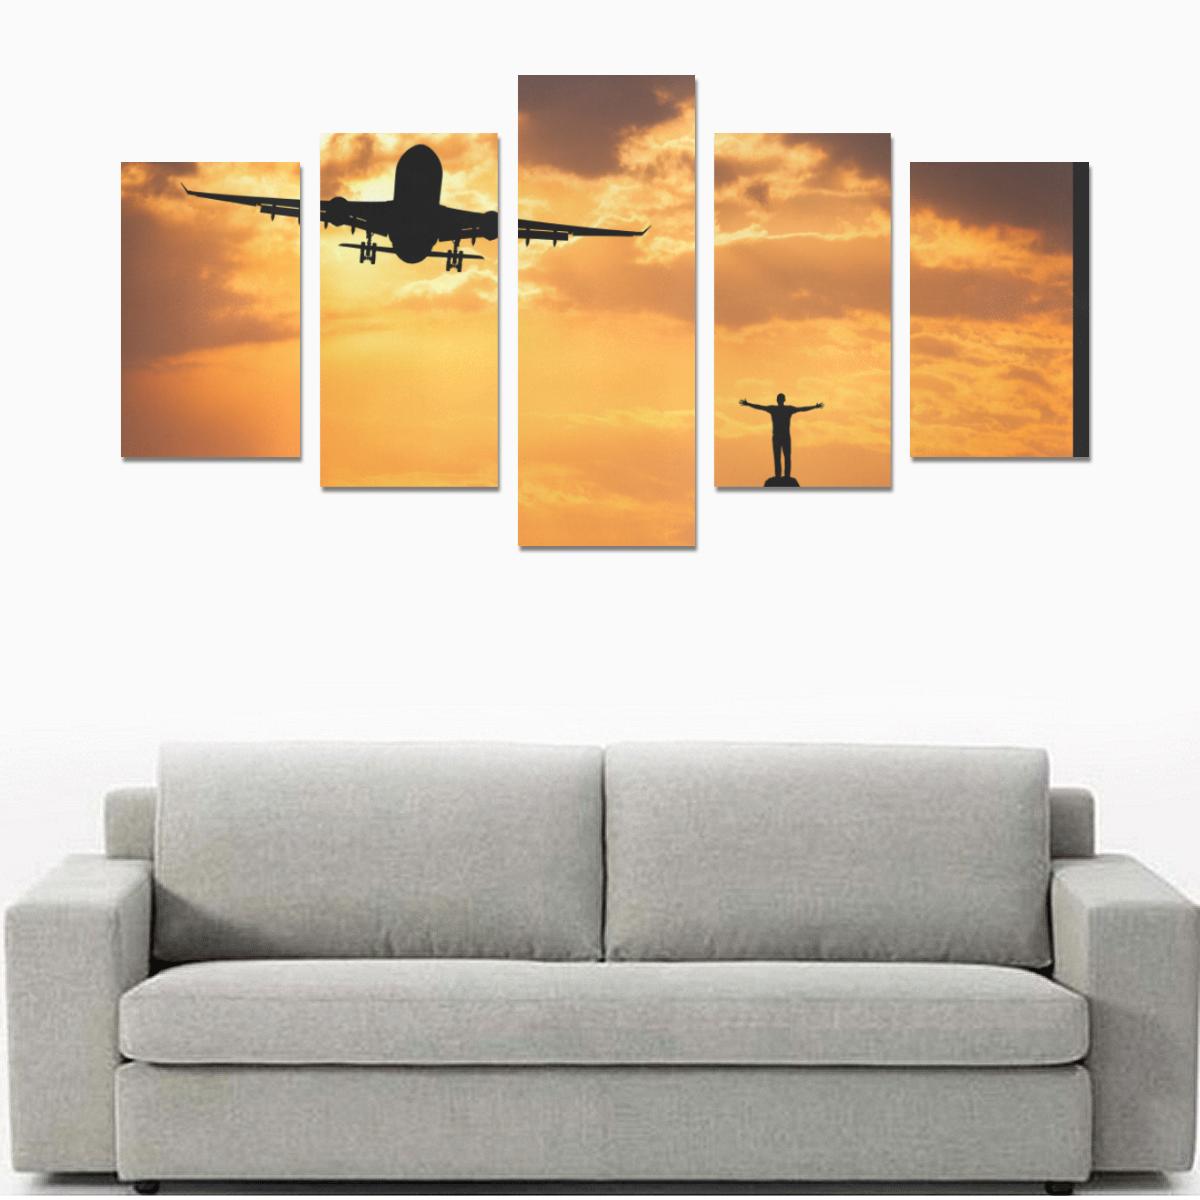 AIRPLANE AND SILHOUETTE OF AIRBUS STANDING HAPPY MAN. CANVAS PRINT SETS C (NO FRAME) THE AV8R